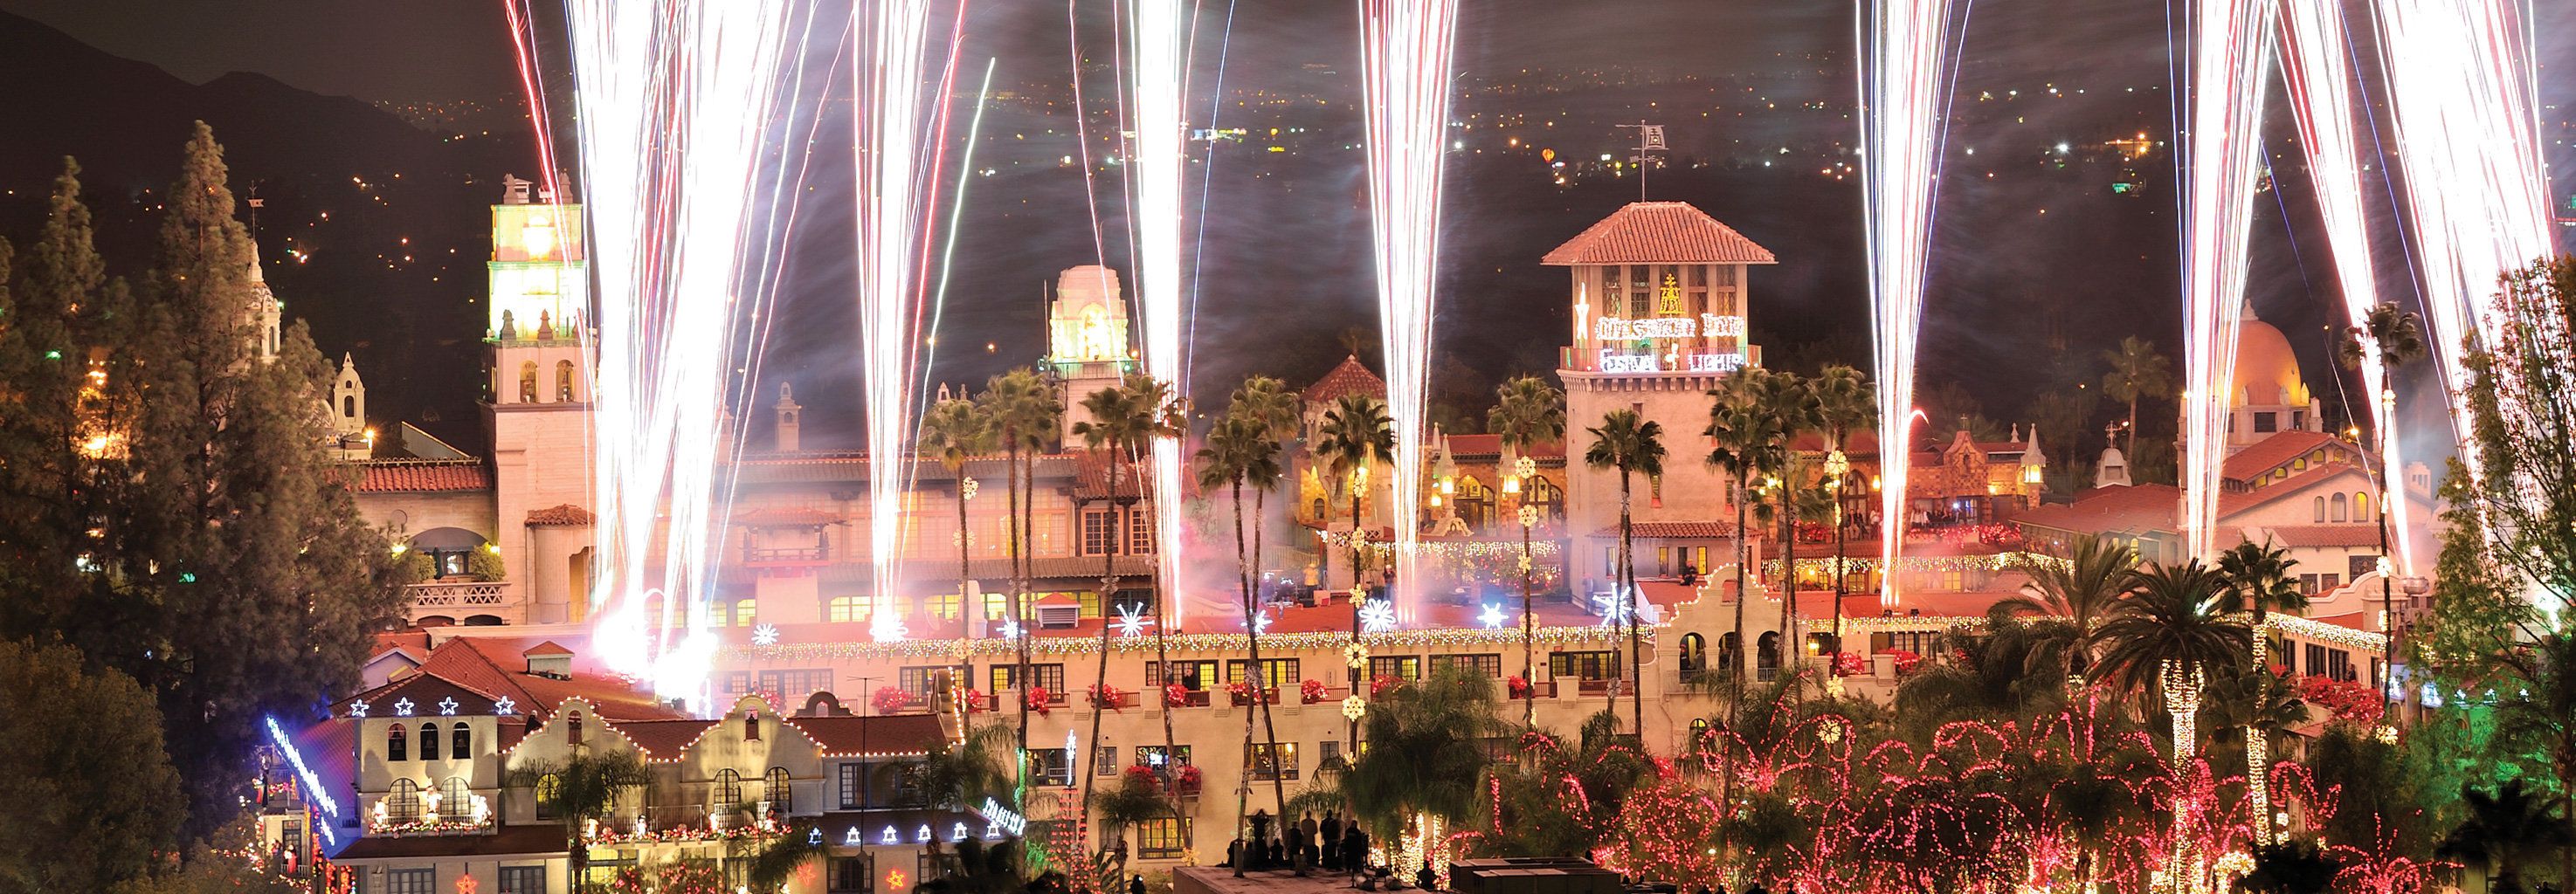 Festival of Lights Riverside CA | Mission Inn Hotel and Spa